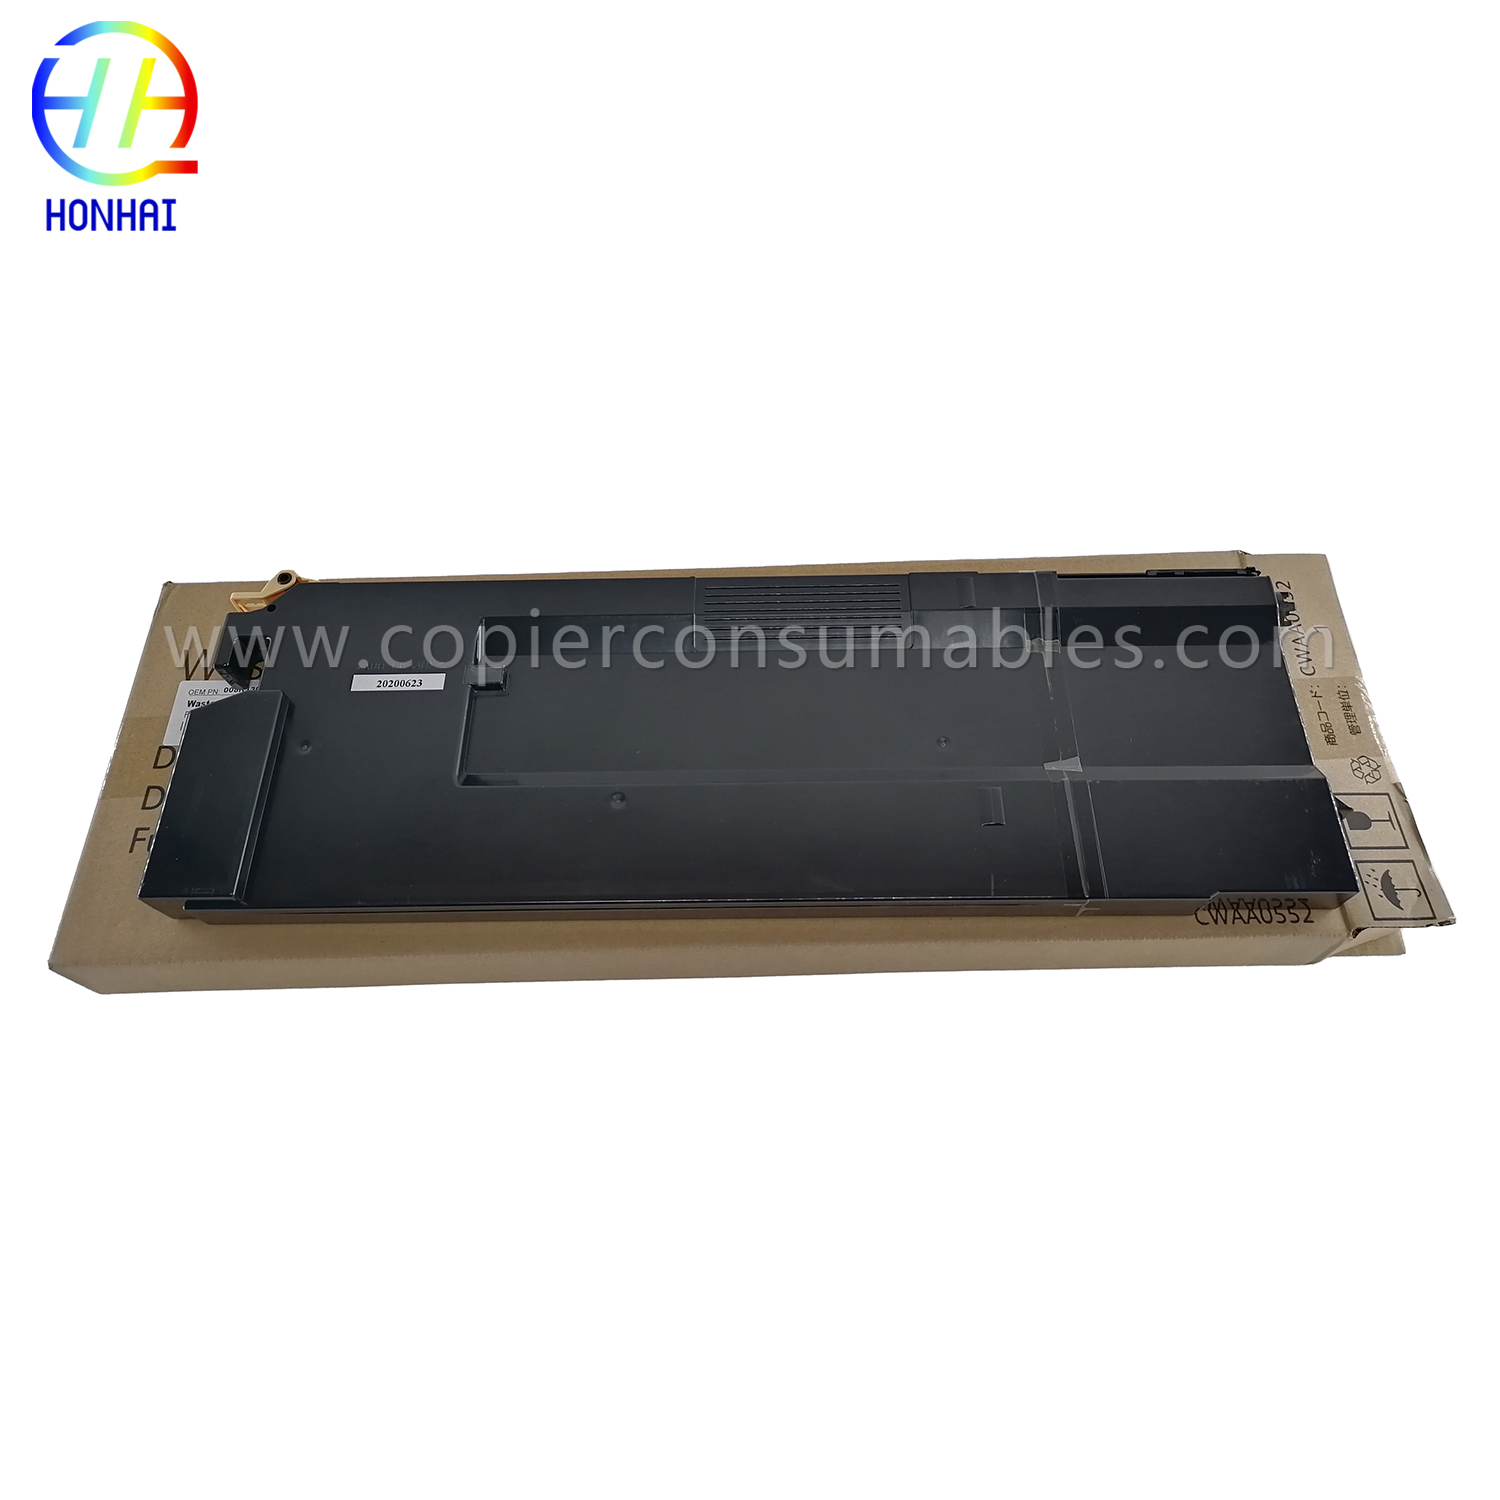 Waste Toner Container for Xerox 4110 4127 4590 4595 D110 D125 D136 D95 ED125 ED95A 008R13036(2) 拷贝